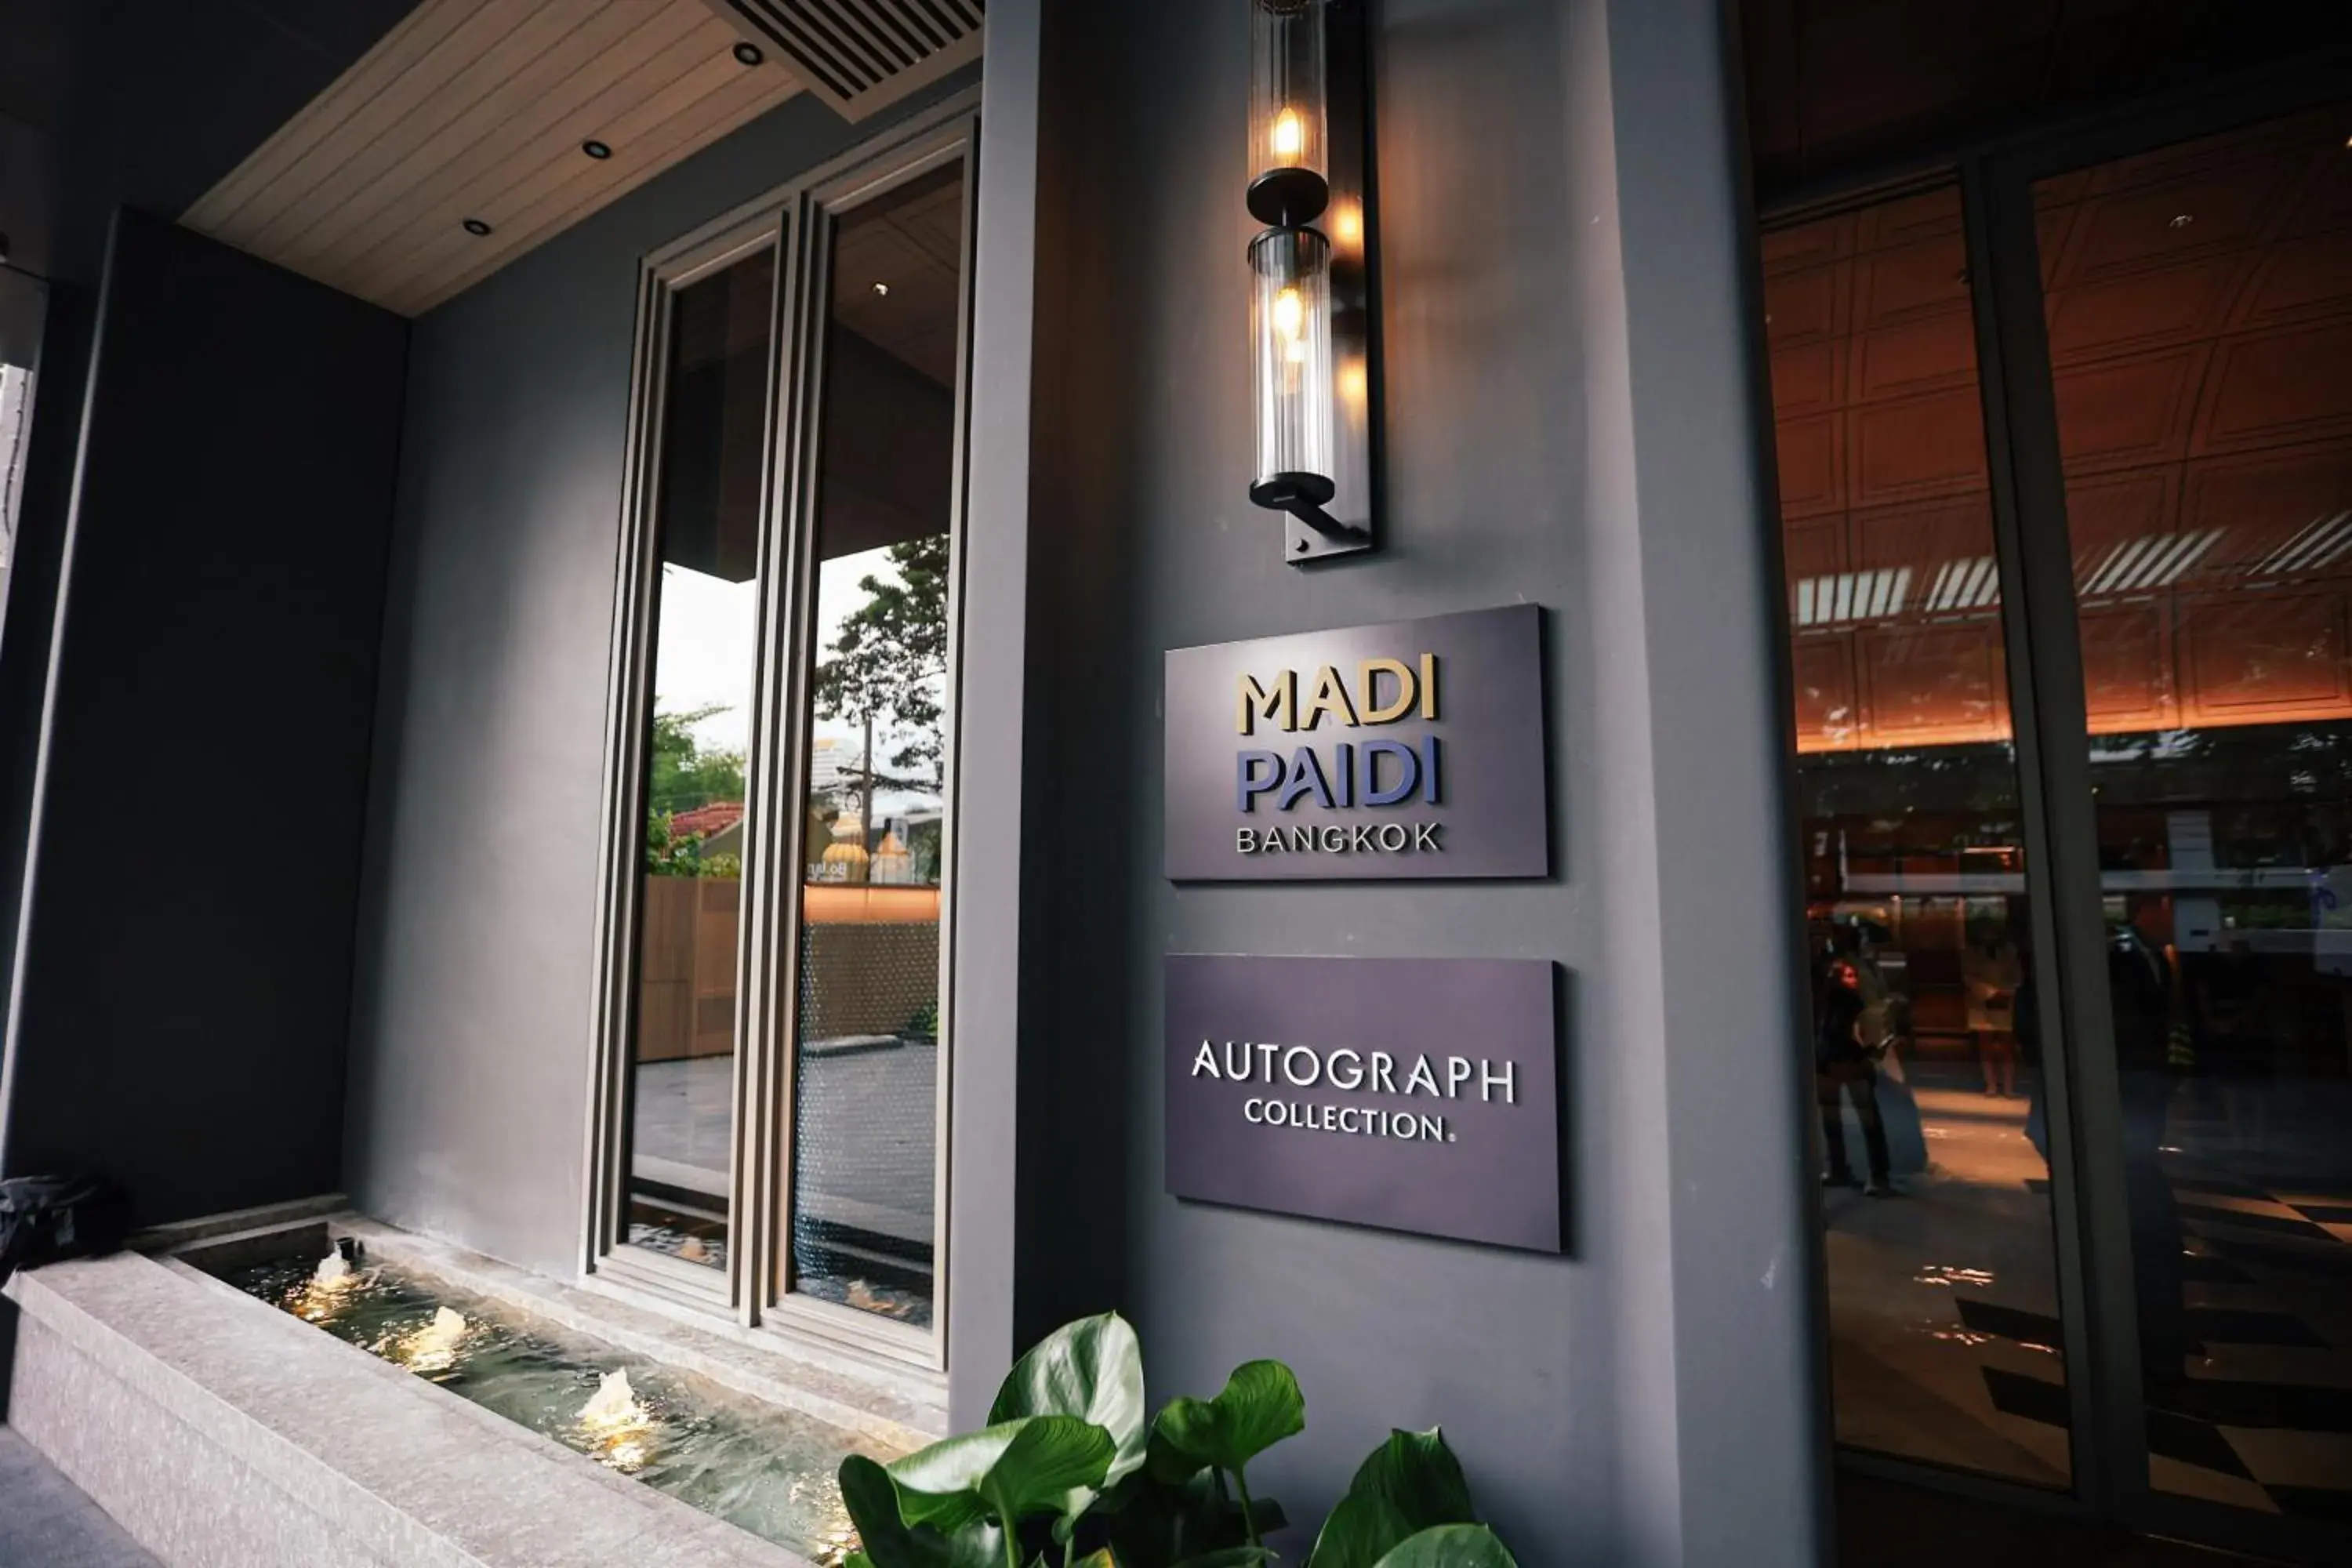 Property building in Madi Paidi Bangkok, Autograph Collection